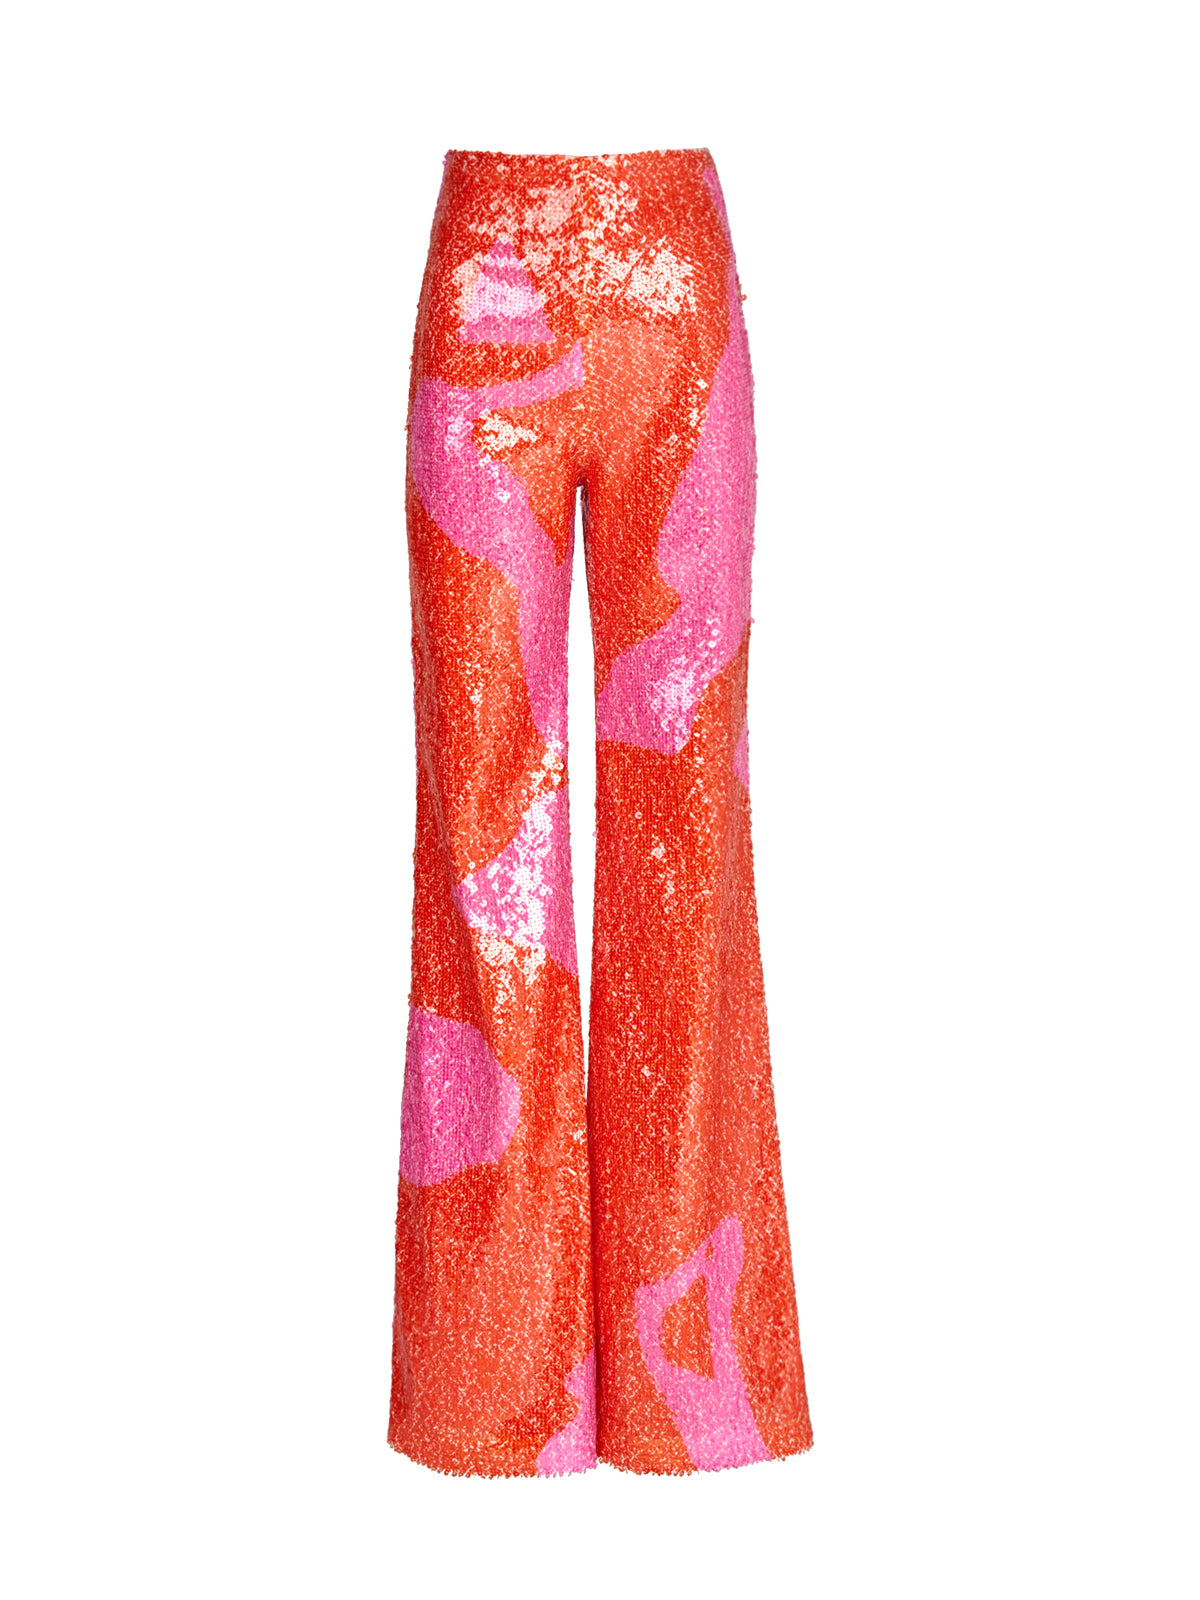 A woman's Avellino Pant Pink Red Marble in orange and pink, offering a figure-favorable fit for Resort 2024.